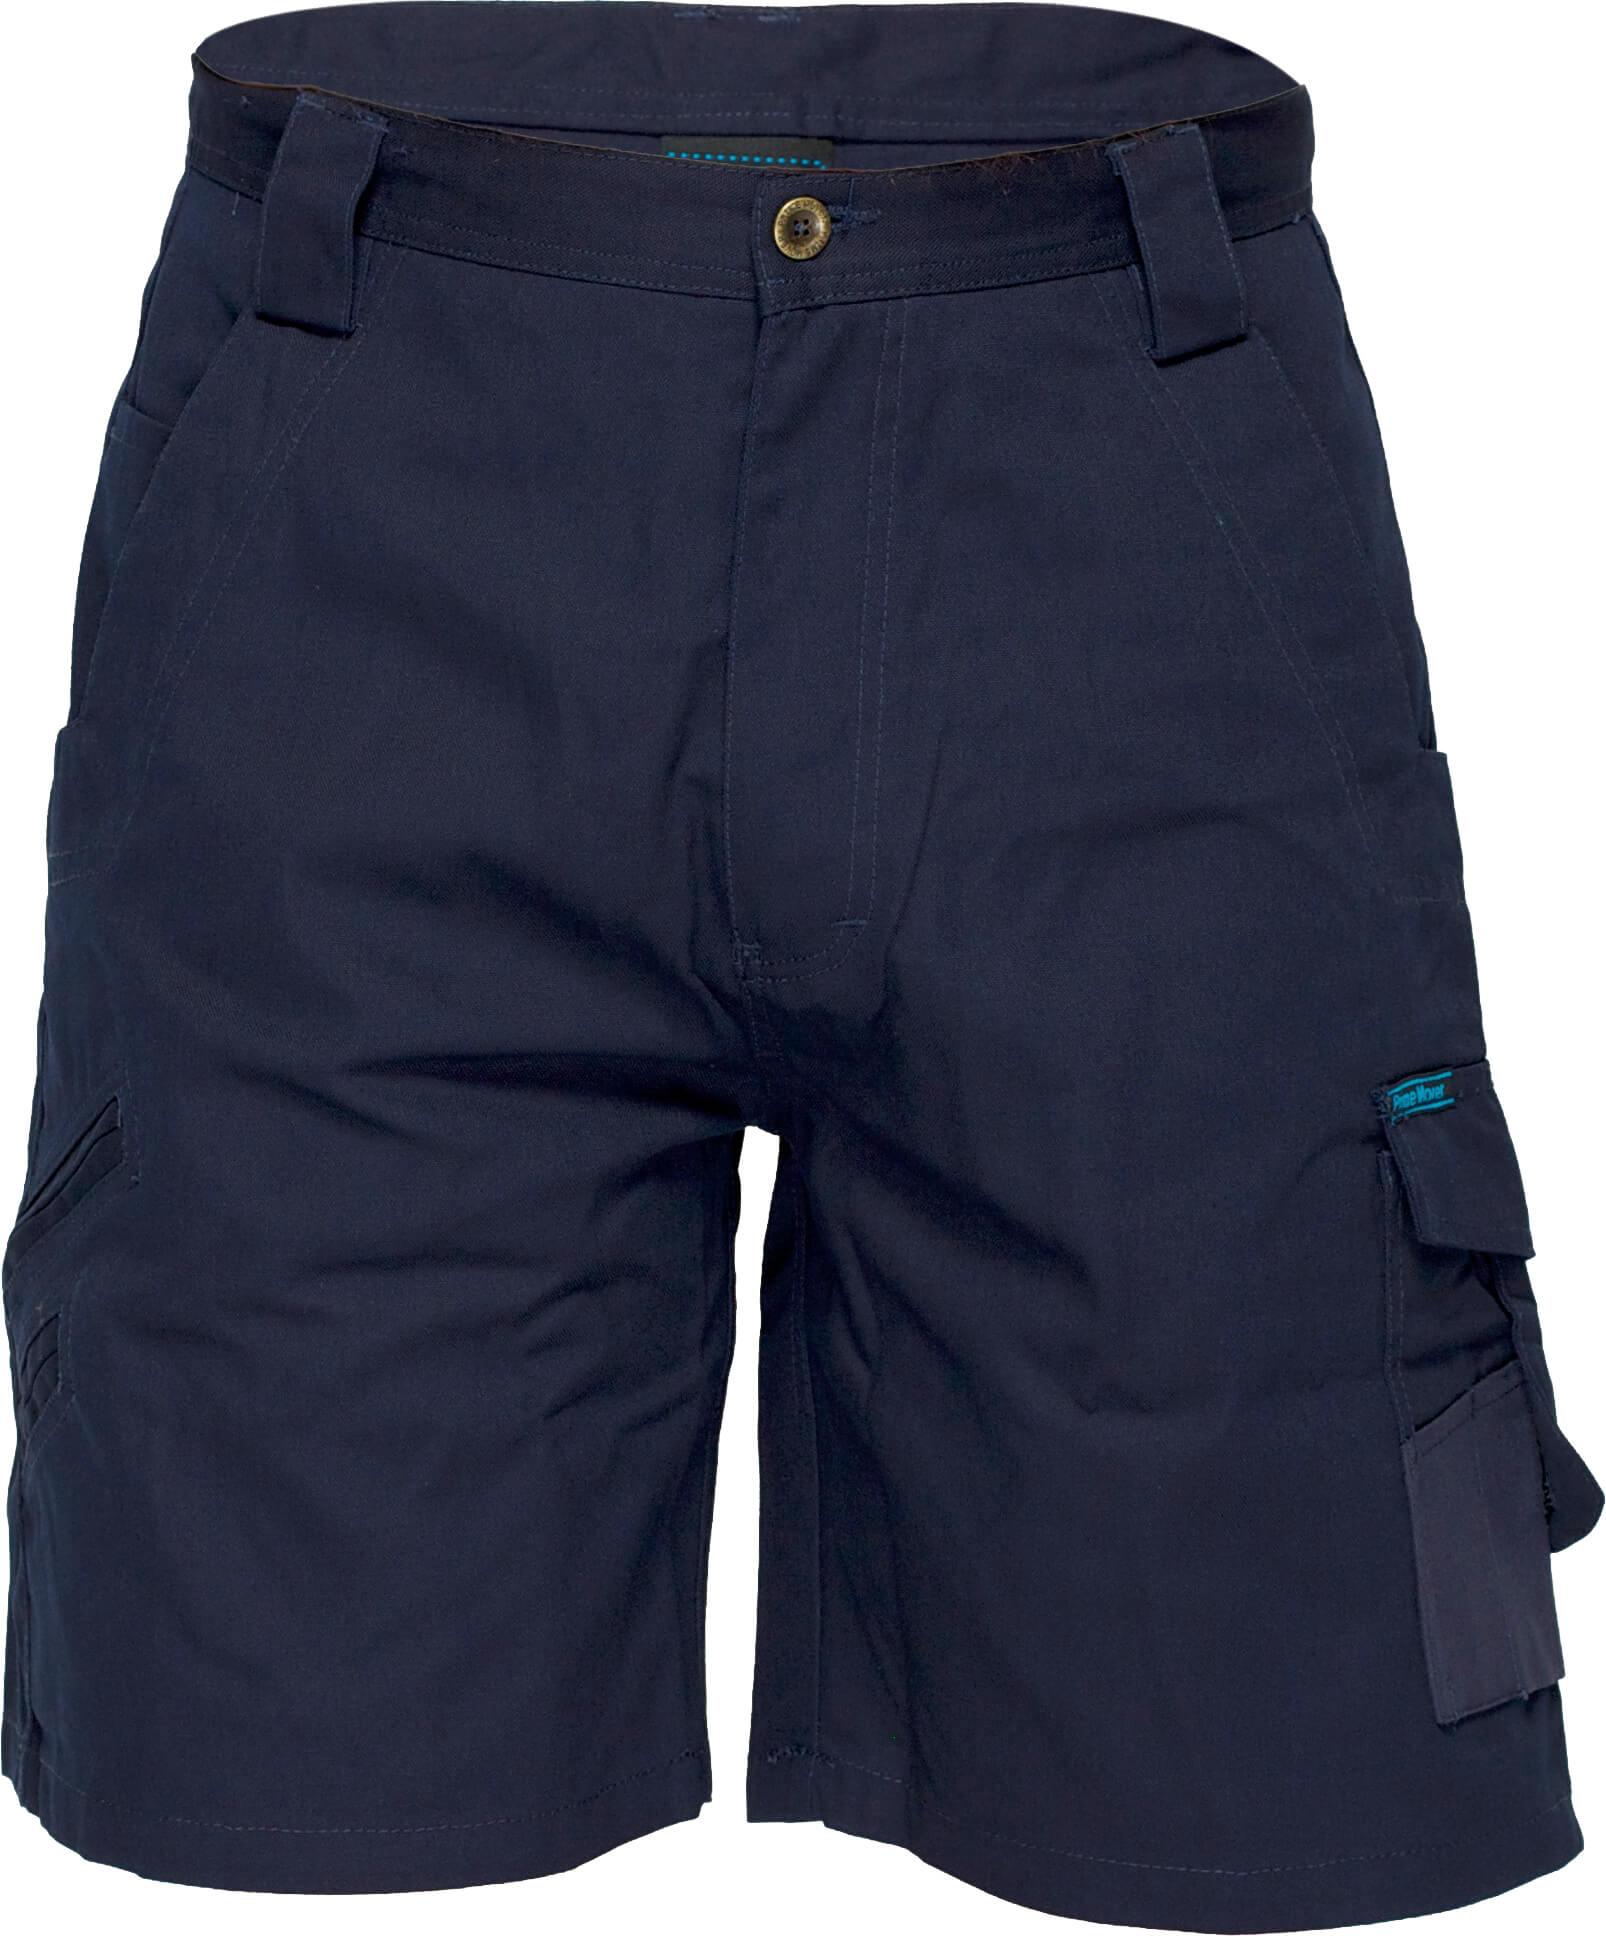 Apatchi Shorts - Prime Mover (MW602) Navy